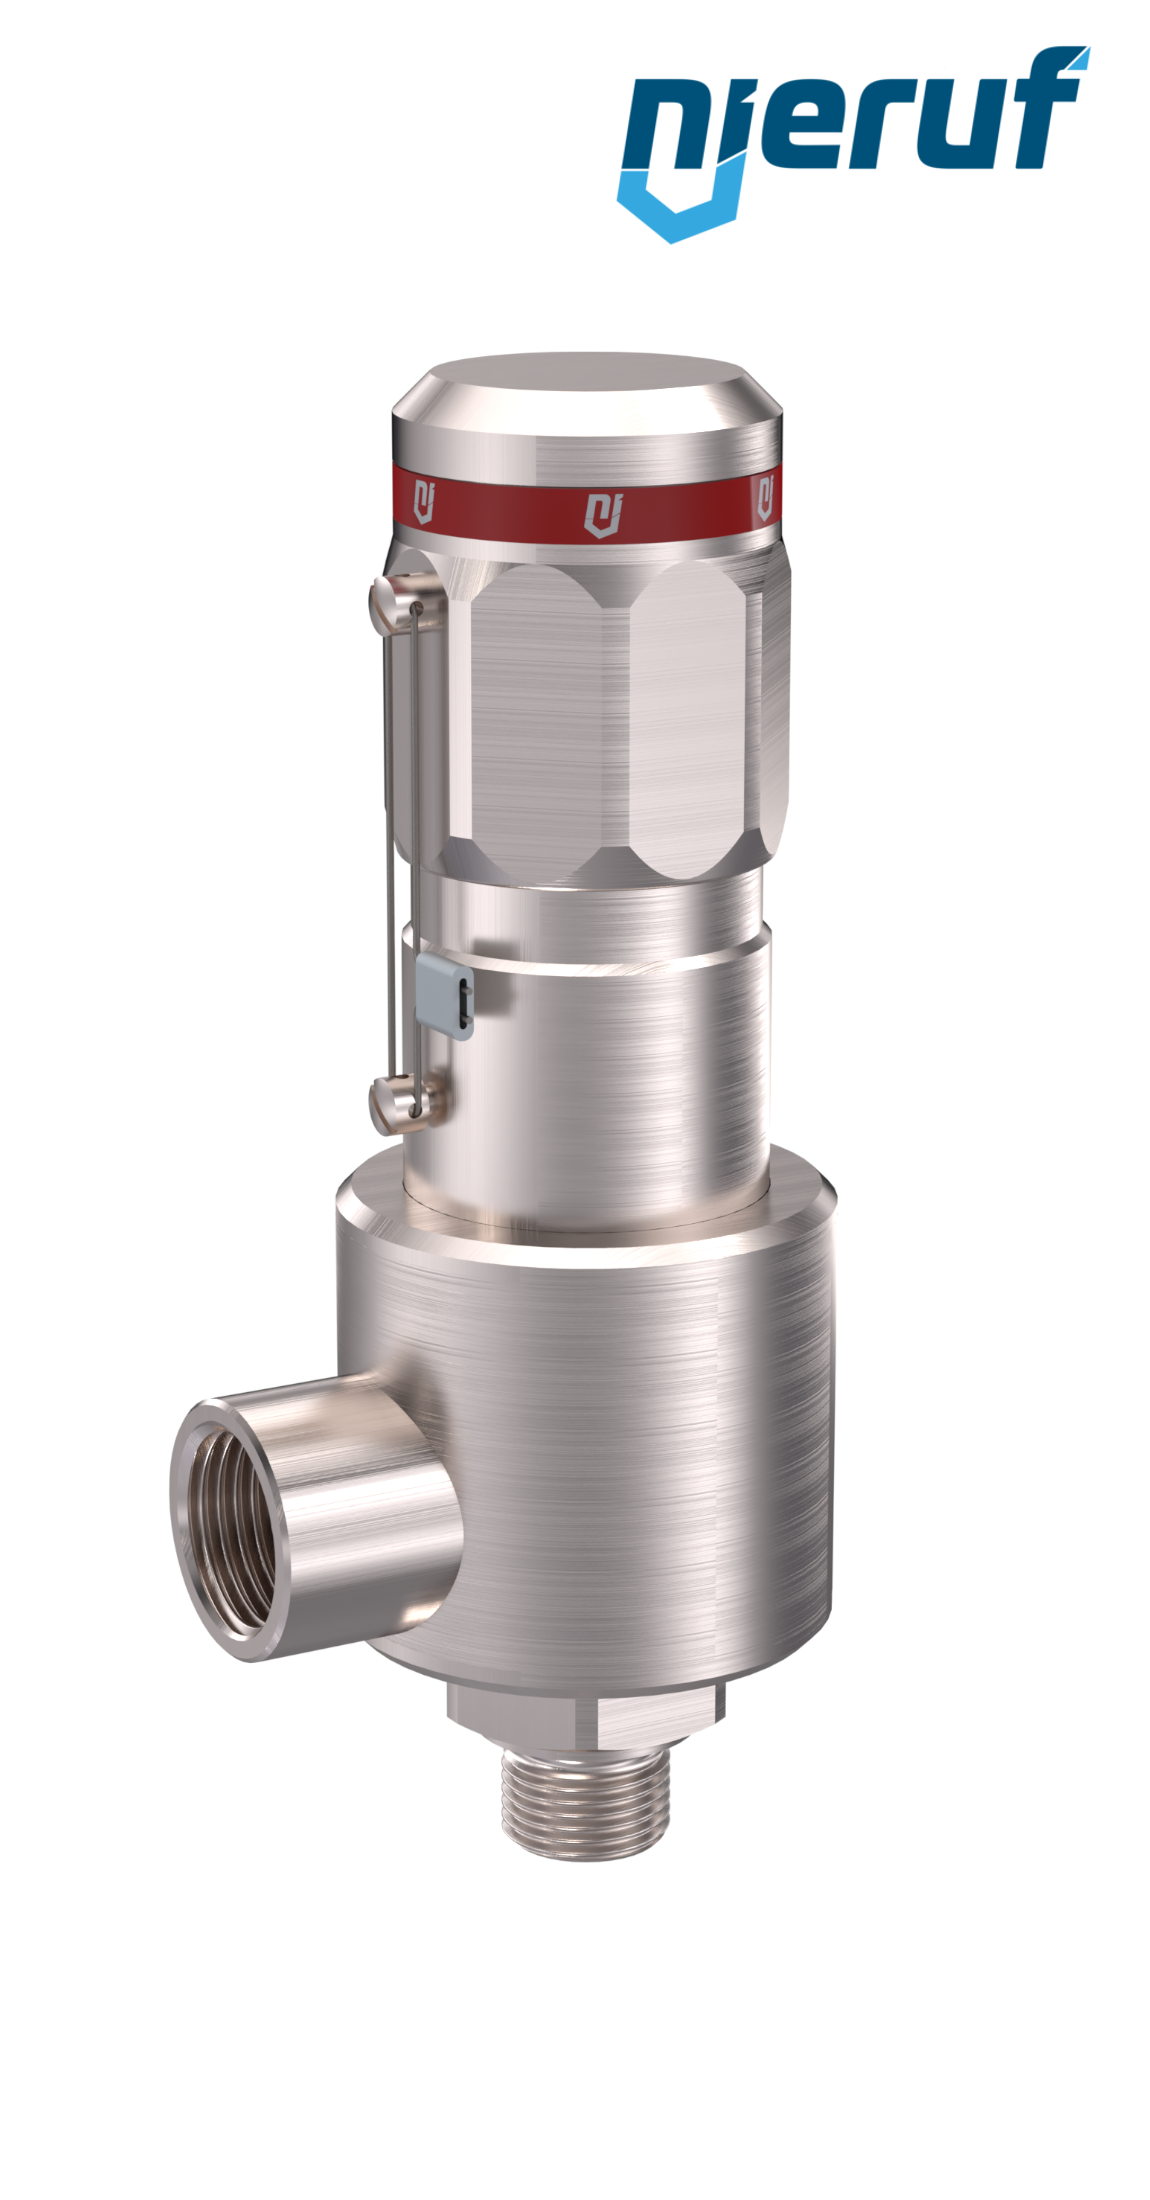 safety-valve DN10 1" m x 1" fm male thread NPT, SV15, MD / PAI, without lifting device, angle-type, >180,0 bar - 350,0 bar